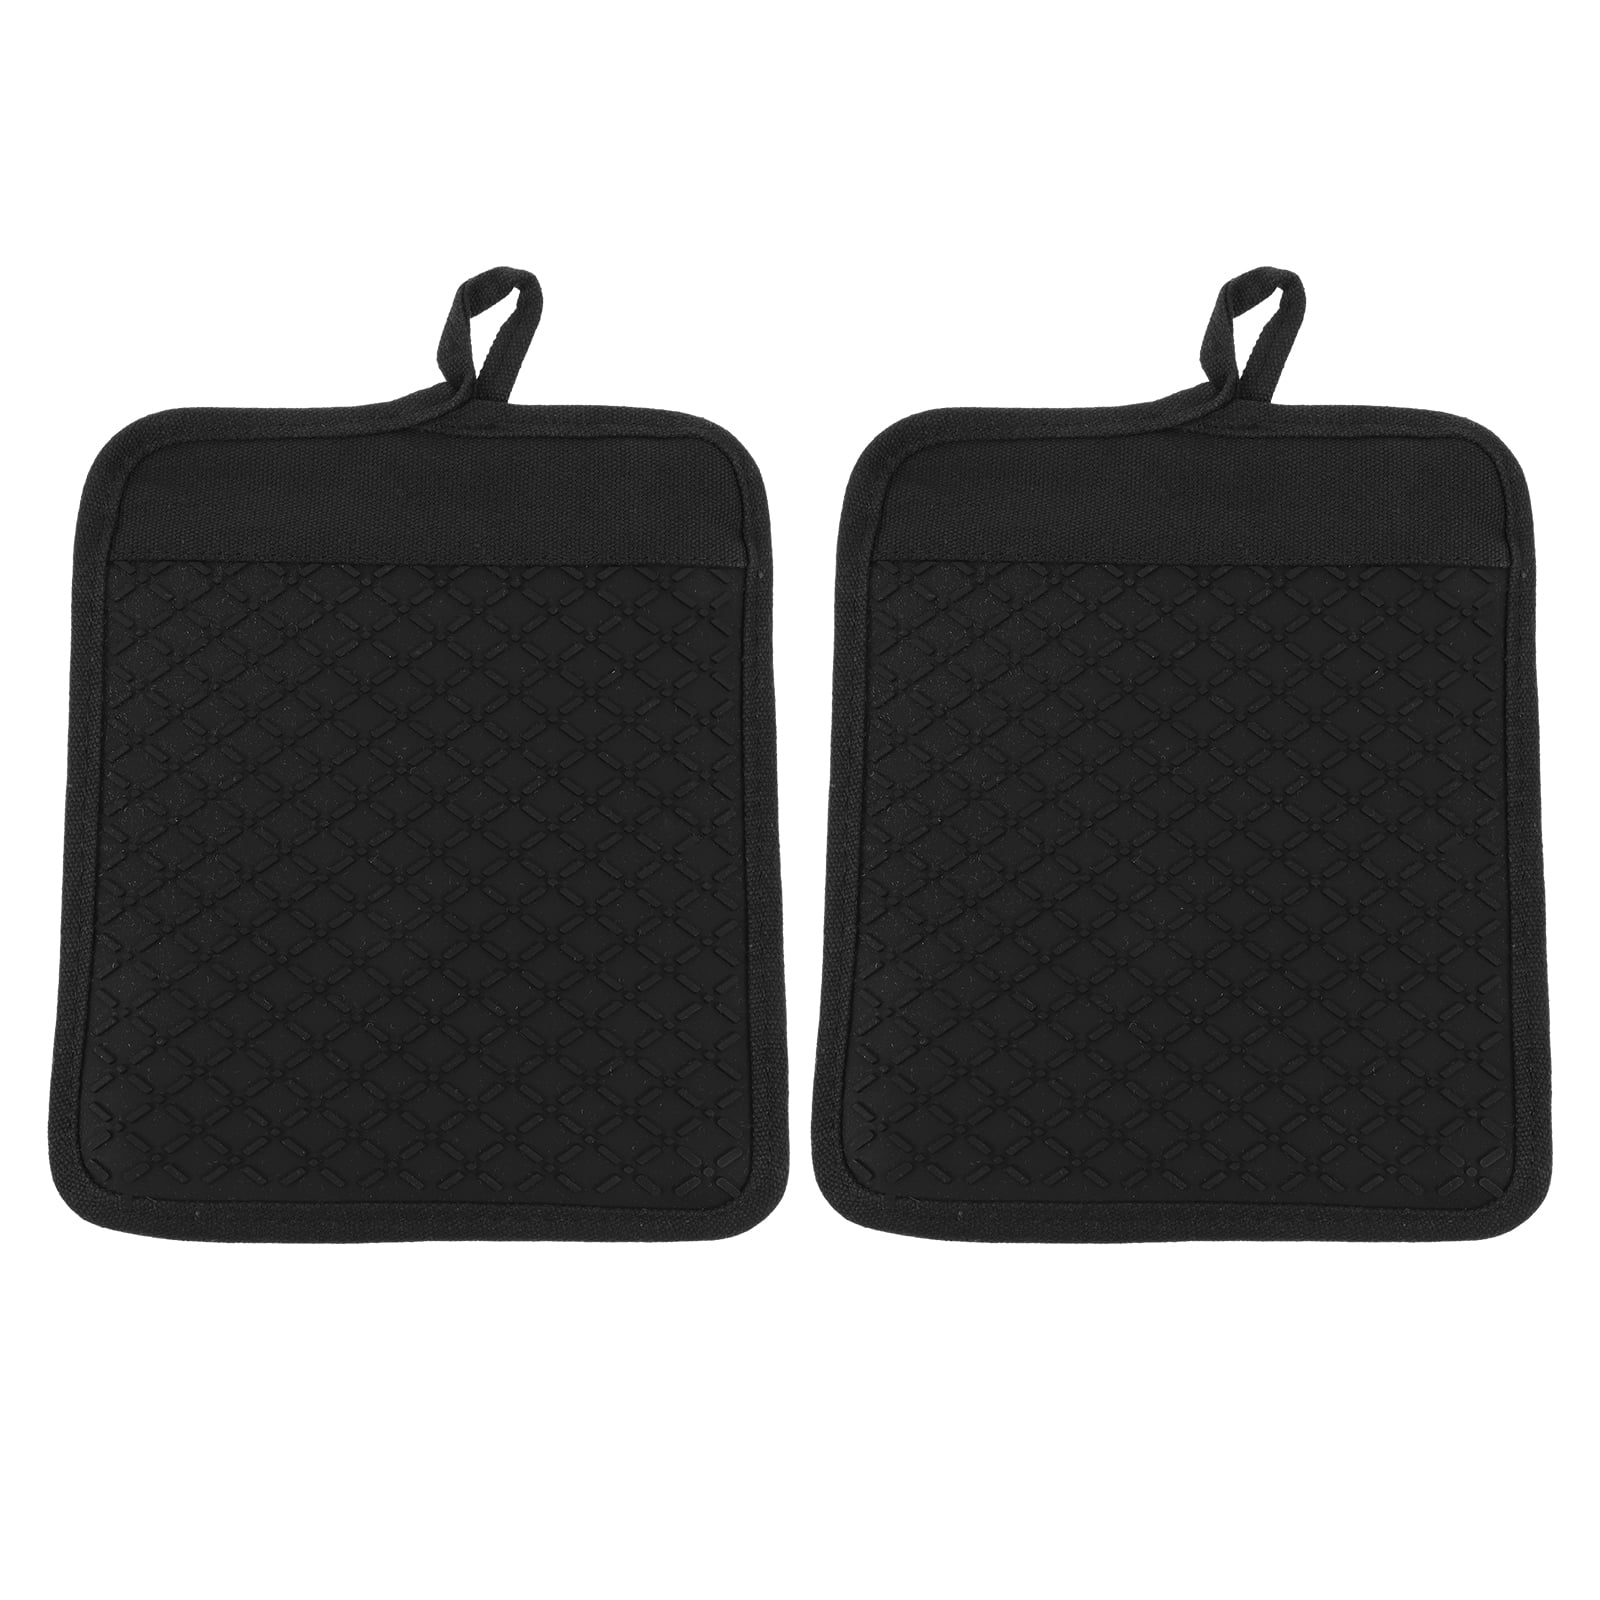 2Pcs Pot Holders Soft Polyester Kitchen Hot Pads with 2 Pocket Portable US